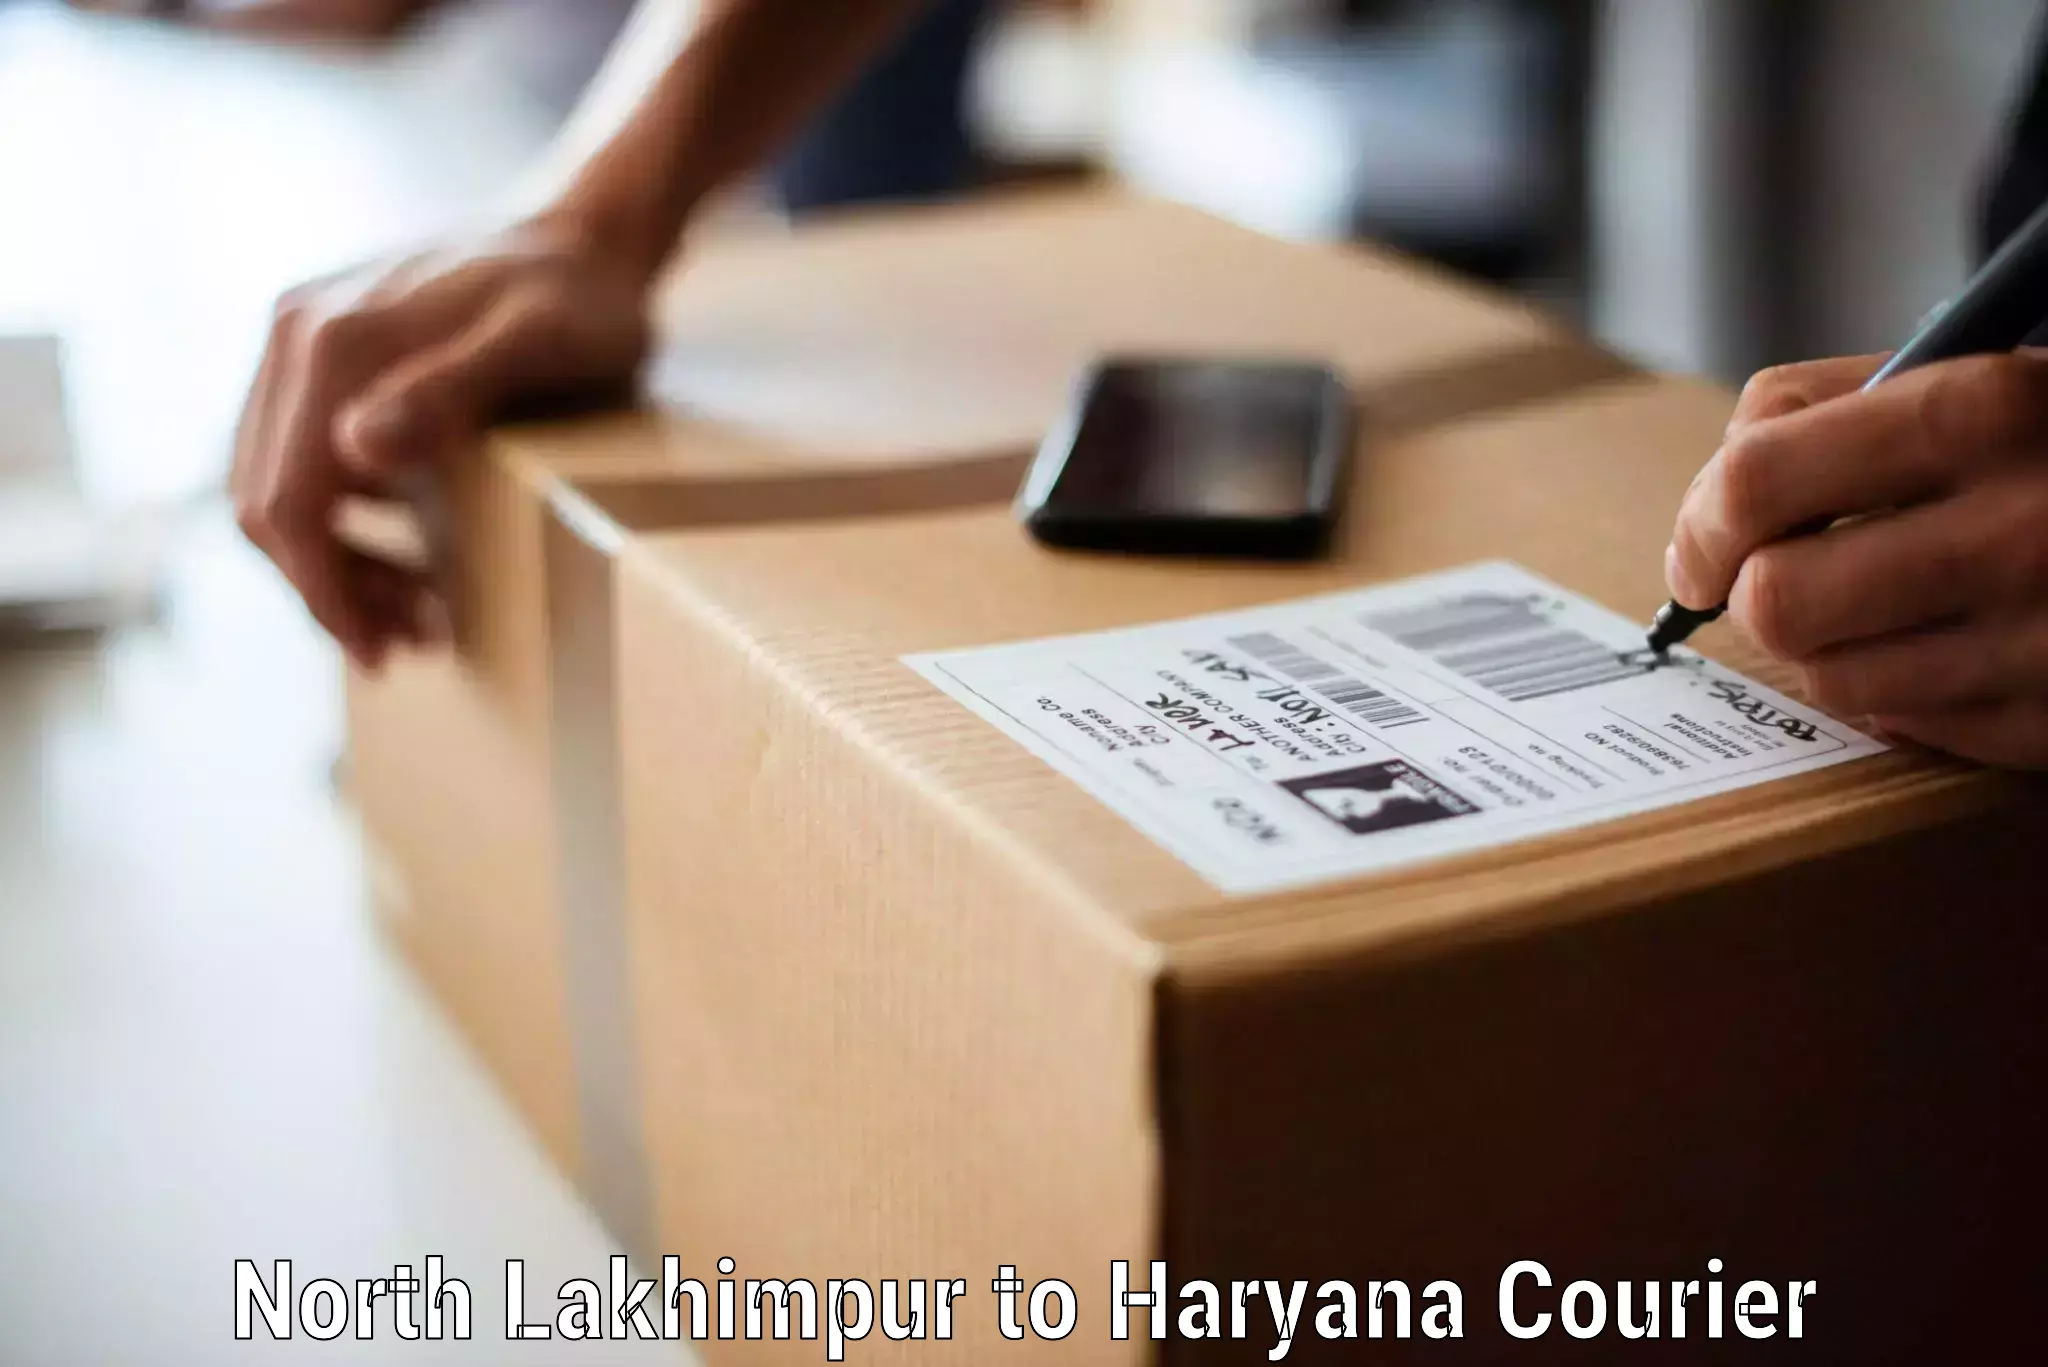 Moving and storage services North Lakhimpur to Haryana